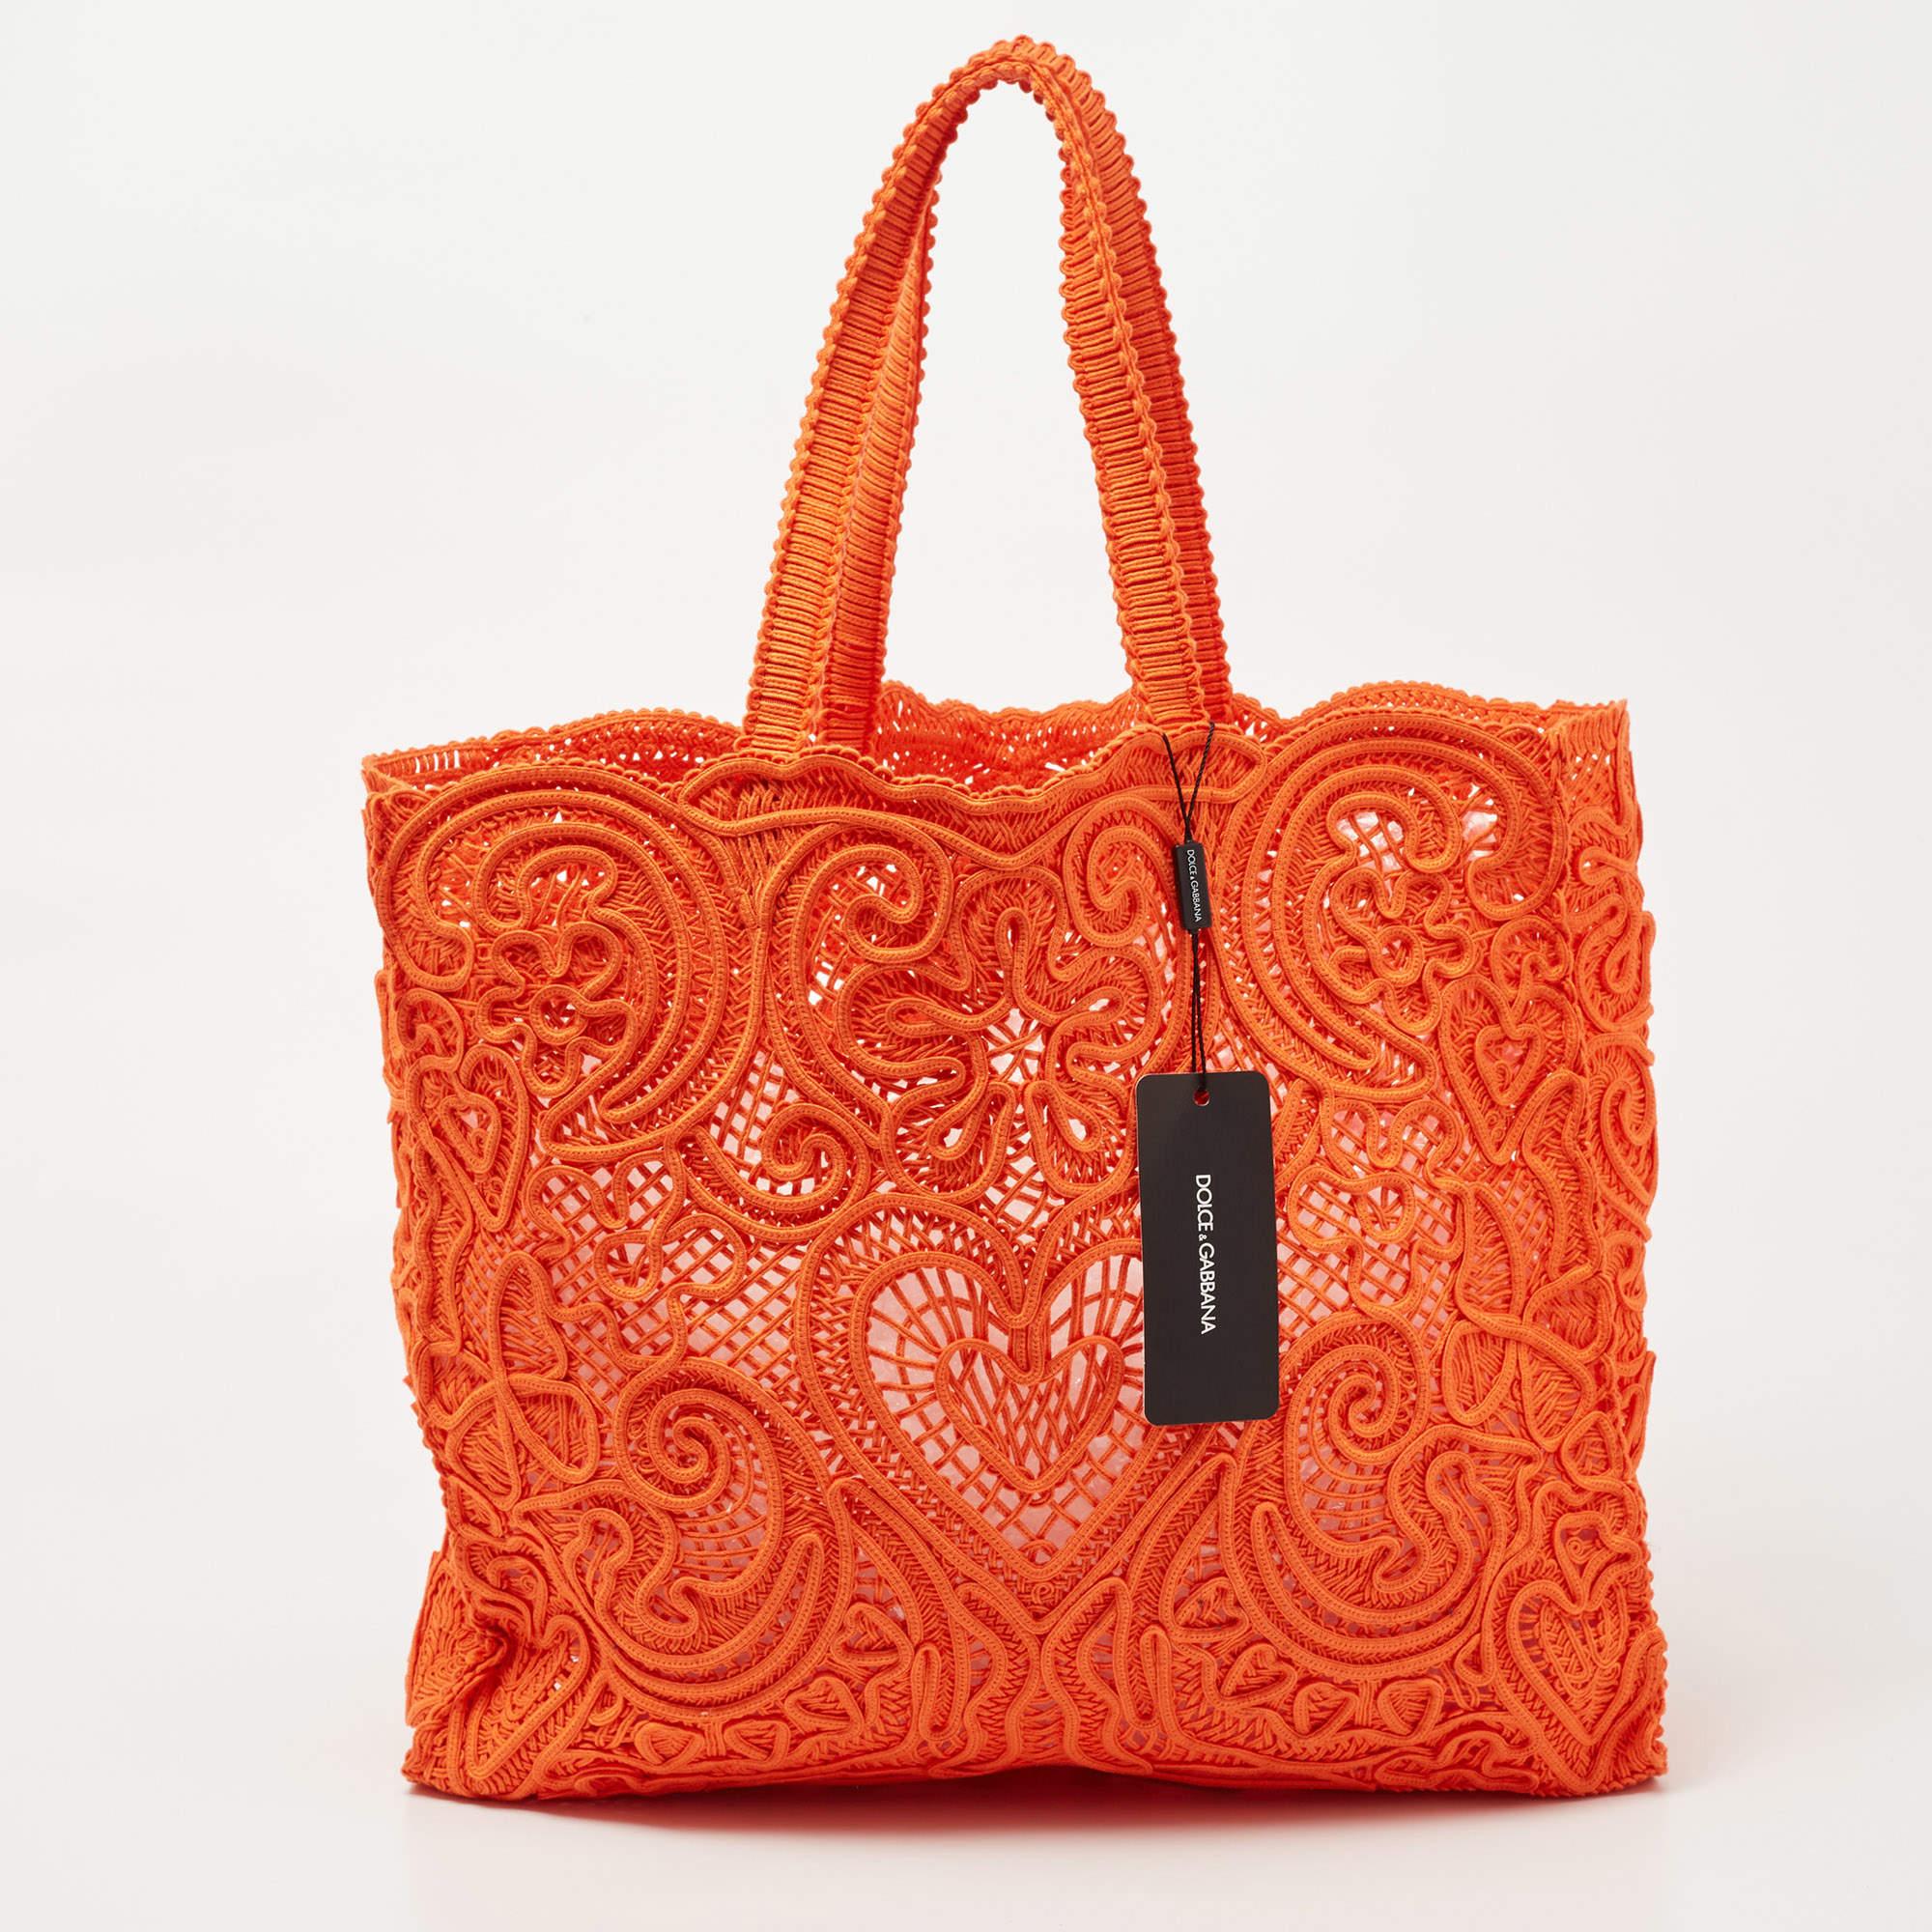 This Dolce & Gabbana crochet Beatrice tote will make a fine pick for when you're heading to a lunch date or curating a vacation edit. We like the vibrant color, simple details, and its high-quality finish.

Includes: Original Dustbag, Tag

